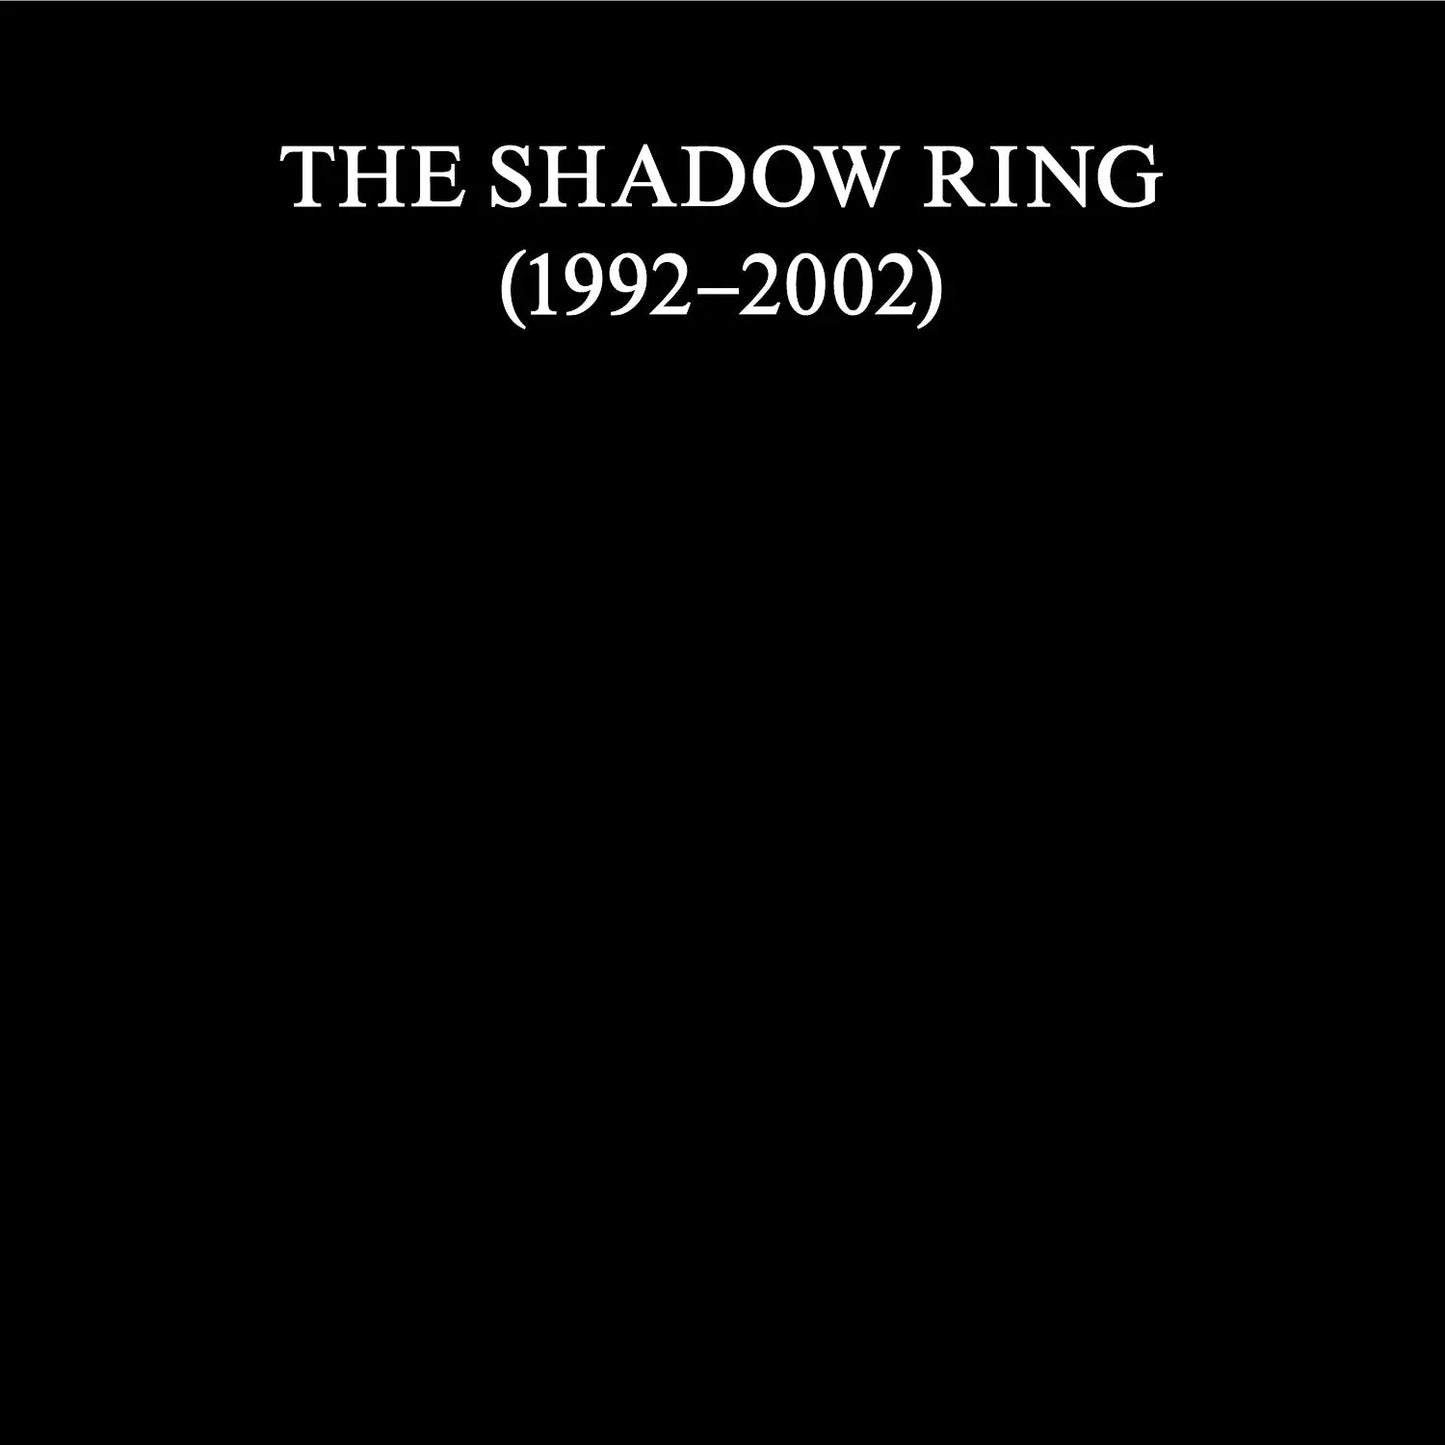 The Shadow Ring - The Shadow Ring (1992-2002) [11xCD+DVD Set]